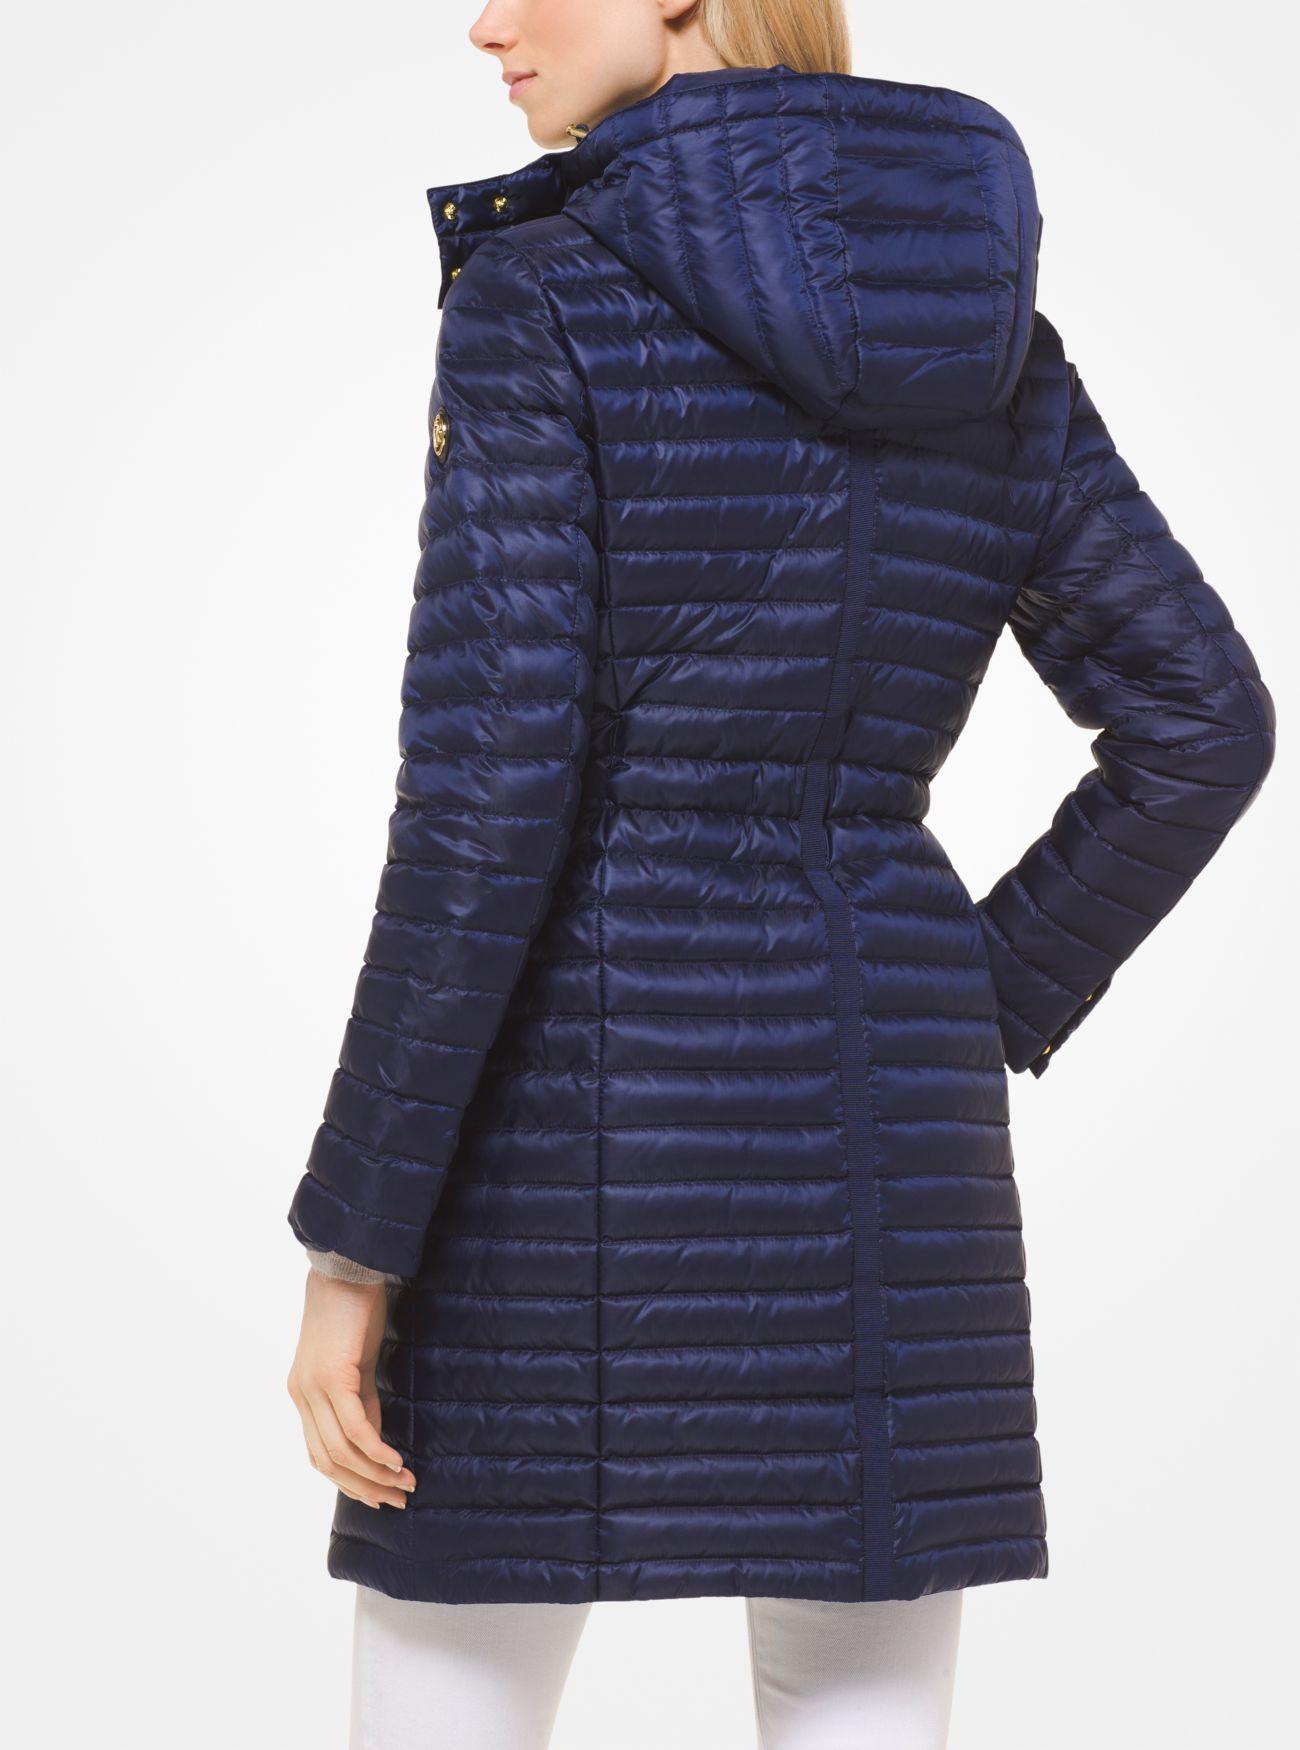 michael kors quilted satin puffer